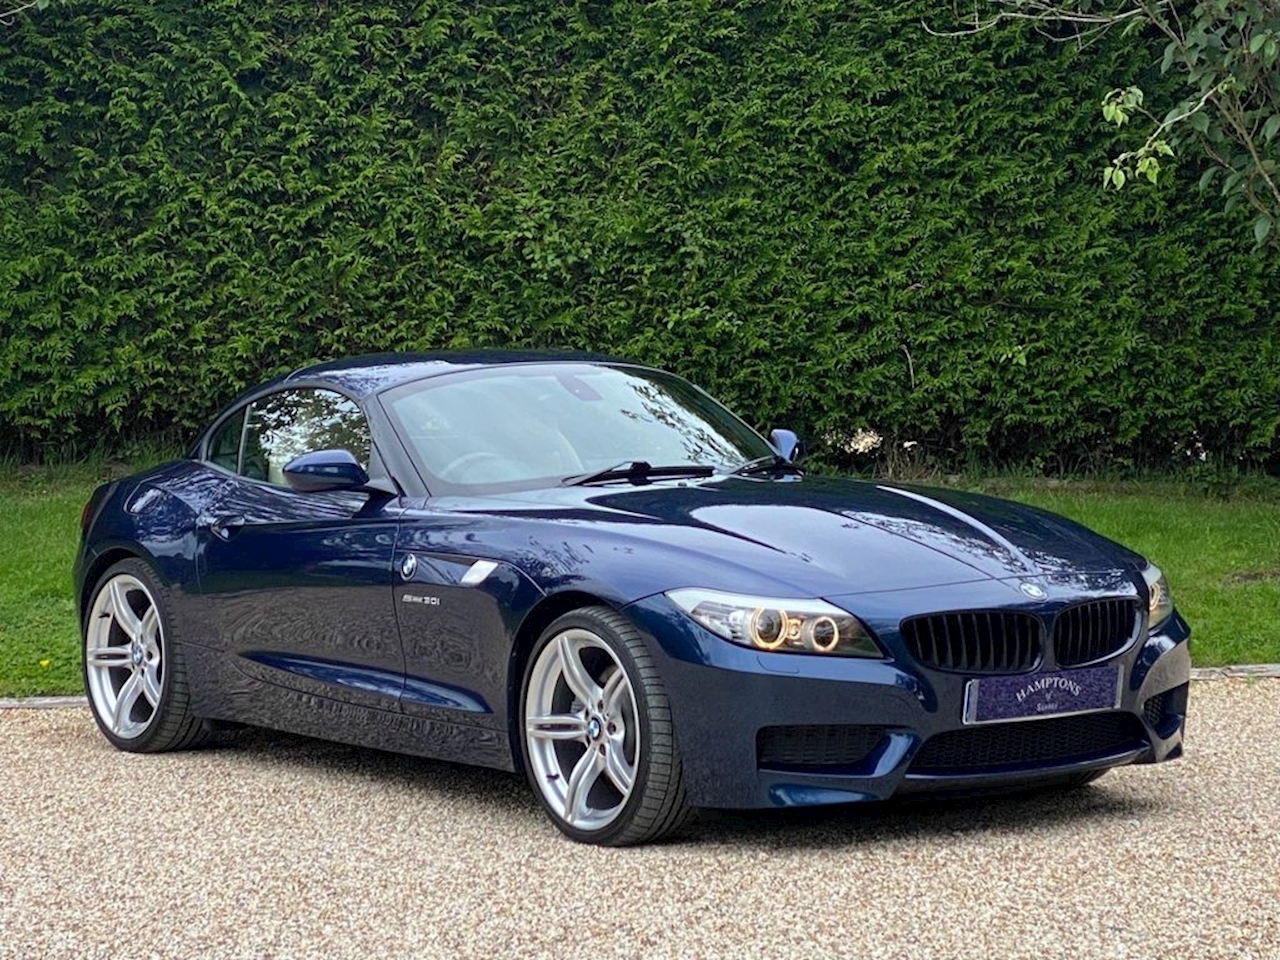 3.0 30i M Sport Highline Edition Convertible 2dr Petrol Automatic sDrive (195 g/km, 258 bhp)